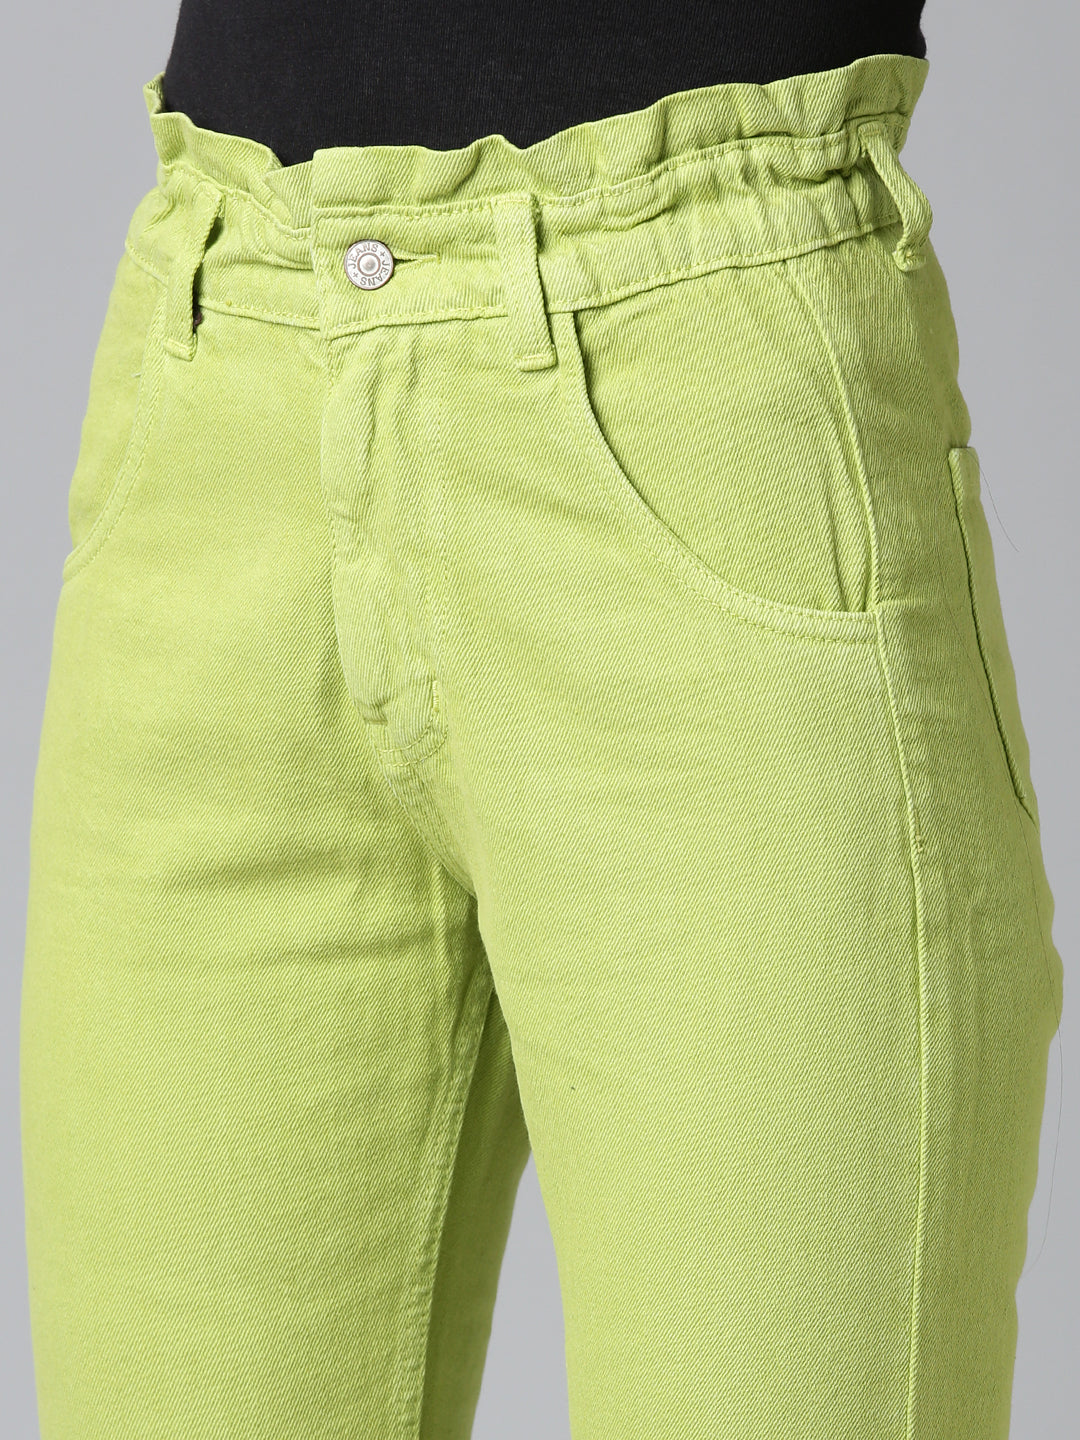 Women Lime Green Solid Mom Fit Denim Jeans